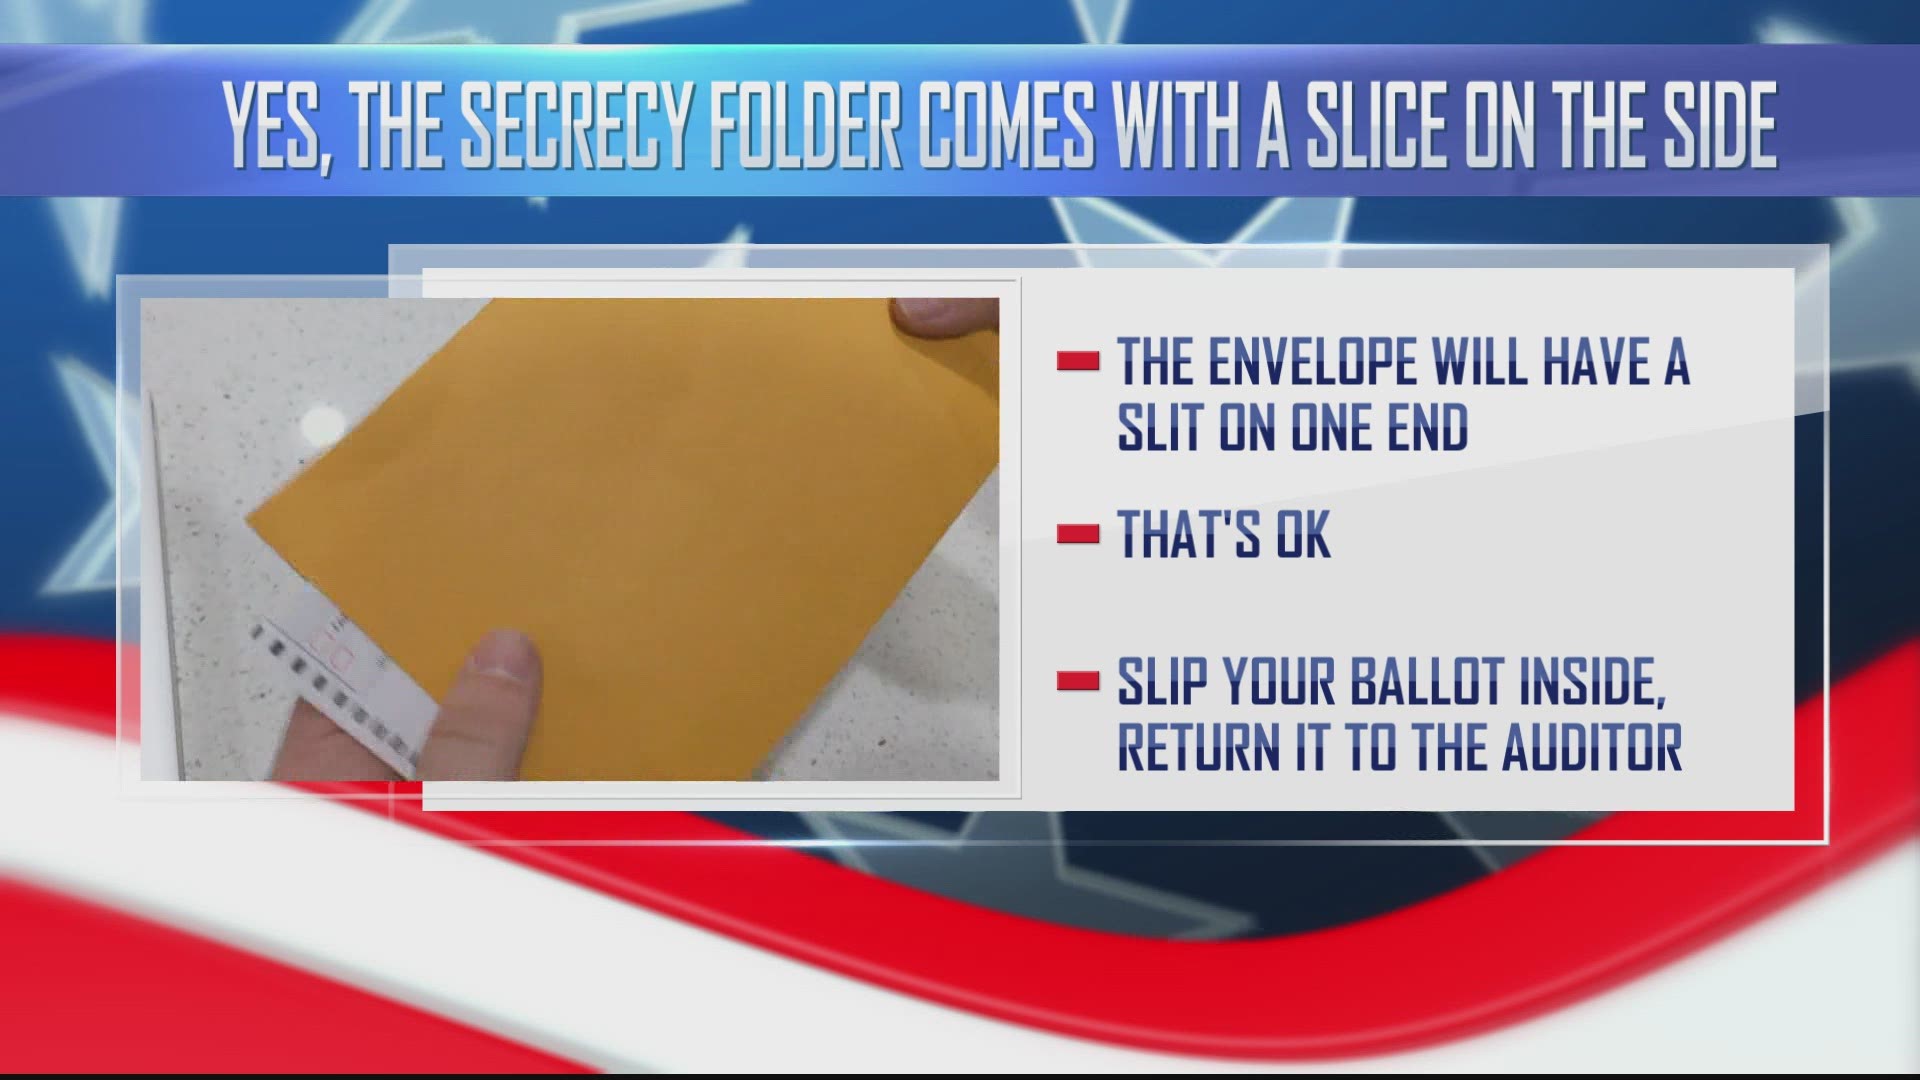 Depending on where you live, the secrecy envelope may have slits on the side or an opening at the top.